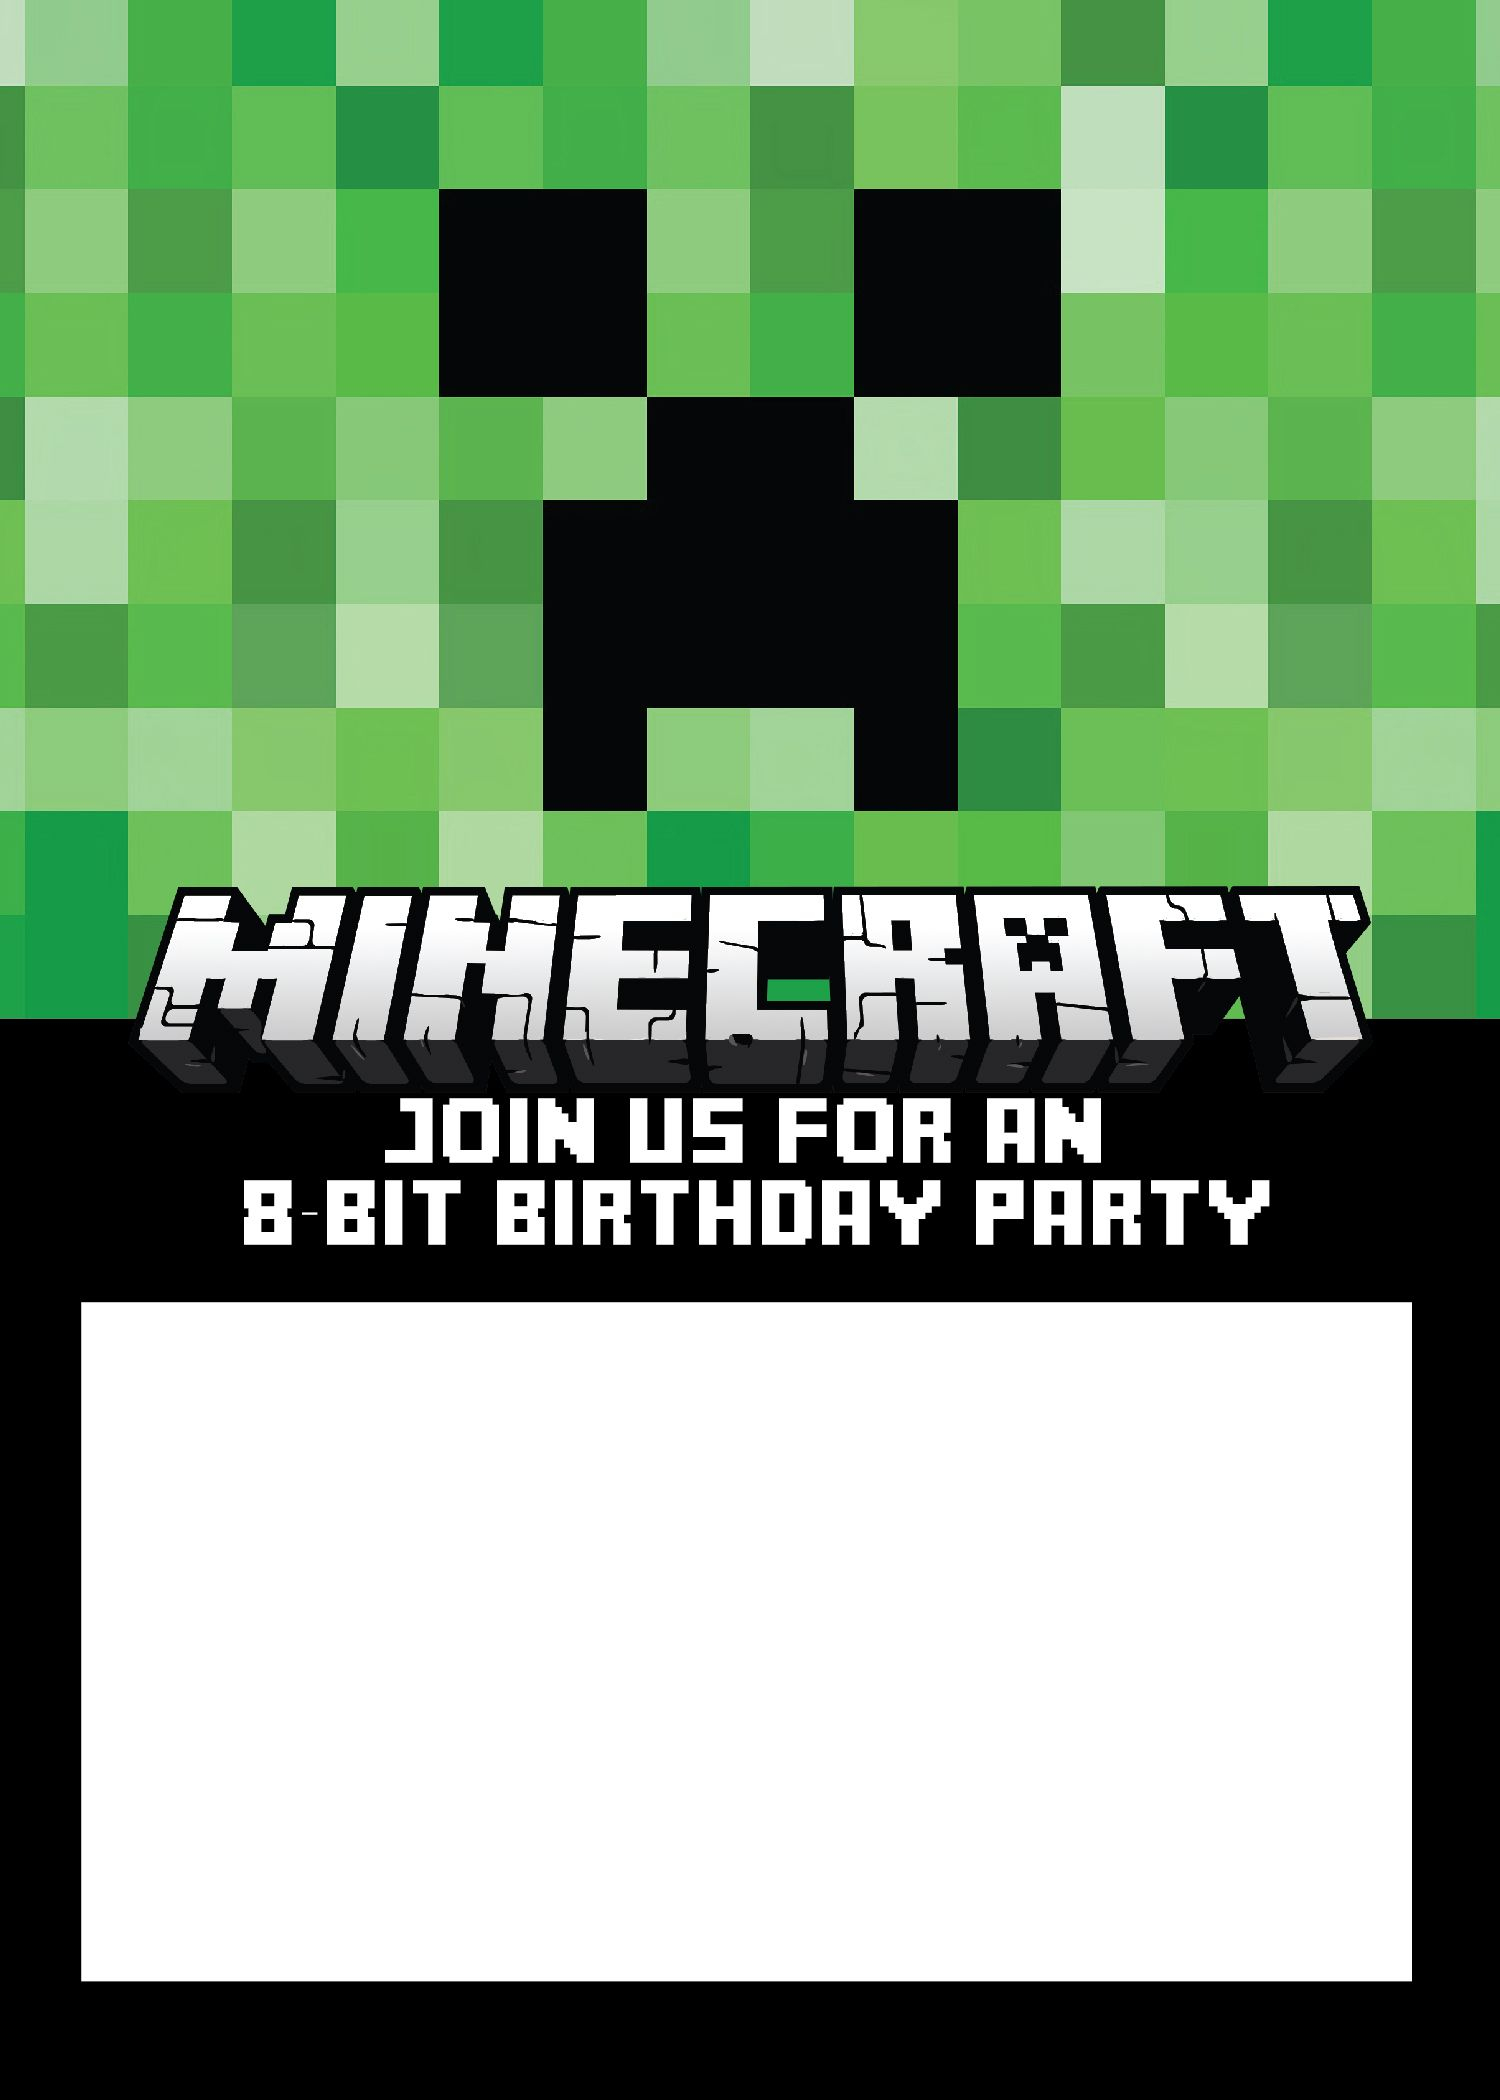 Free Minecraft Invitations For Print Or Evite! | Minecraft Party - Free Printable Minecraft Birthday Party Invitations Templates